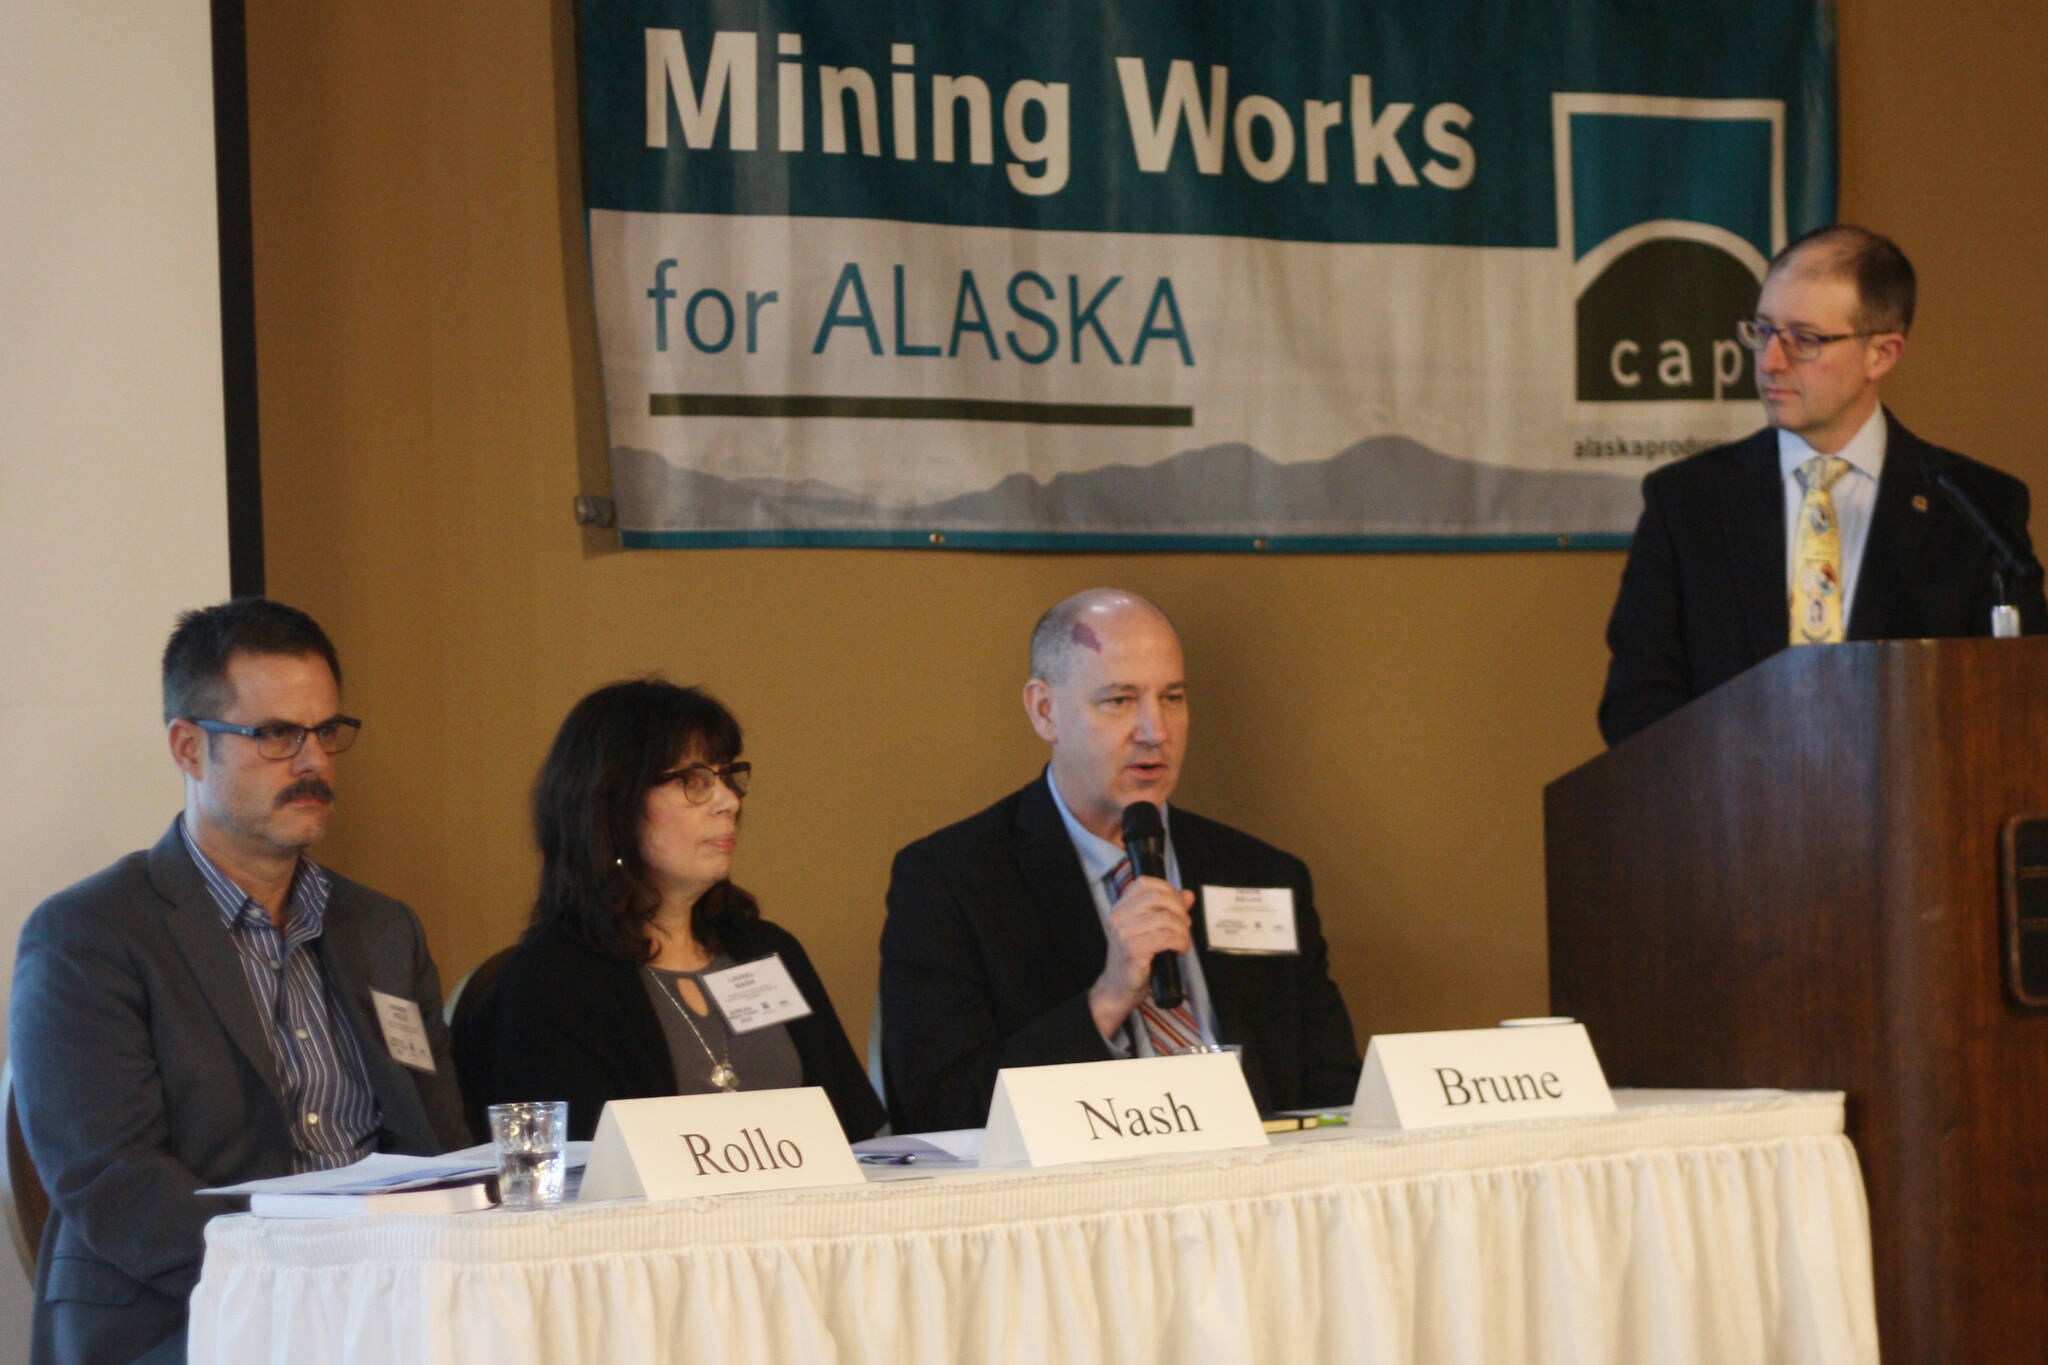 A panel discussion about transboundary mining issues involving Alaska and British Columbia is hosted Tuesday by state Sen. Jesse Kiehl, D-Juneau, during the Juneau Mining Forum conference Tuesday at the Baranof Hotel. Participating in the discussion were Andrew Rollo, left, assistant deputy minister for Energy Mines and Low Carbon Innovation in B.C., Laurel Nash, assistant deputy minister for the Ministry of Environment & Climate Change Strategy in B.C., and Jason Brune, commissioner of the Alaska Department of Environmental Conservation. (Mark Sabbatini / Juneau Empire)